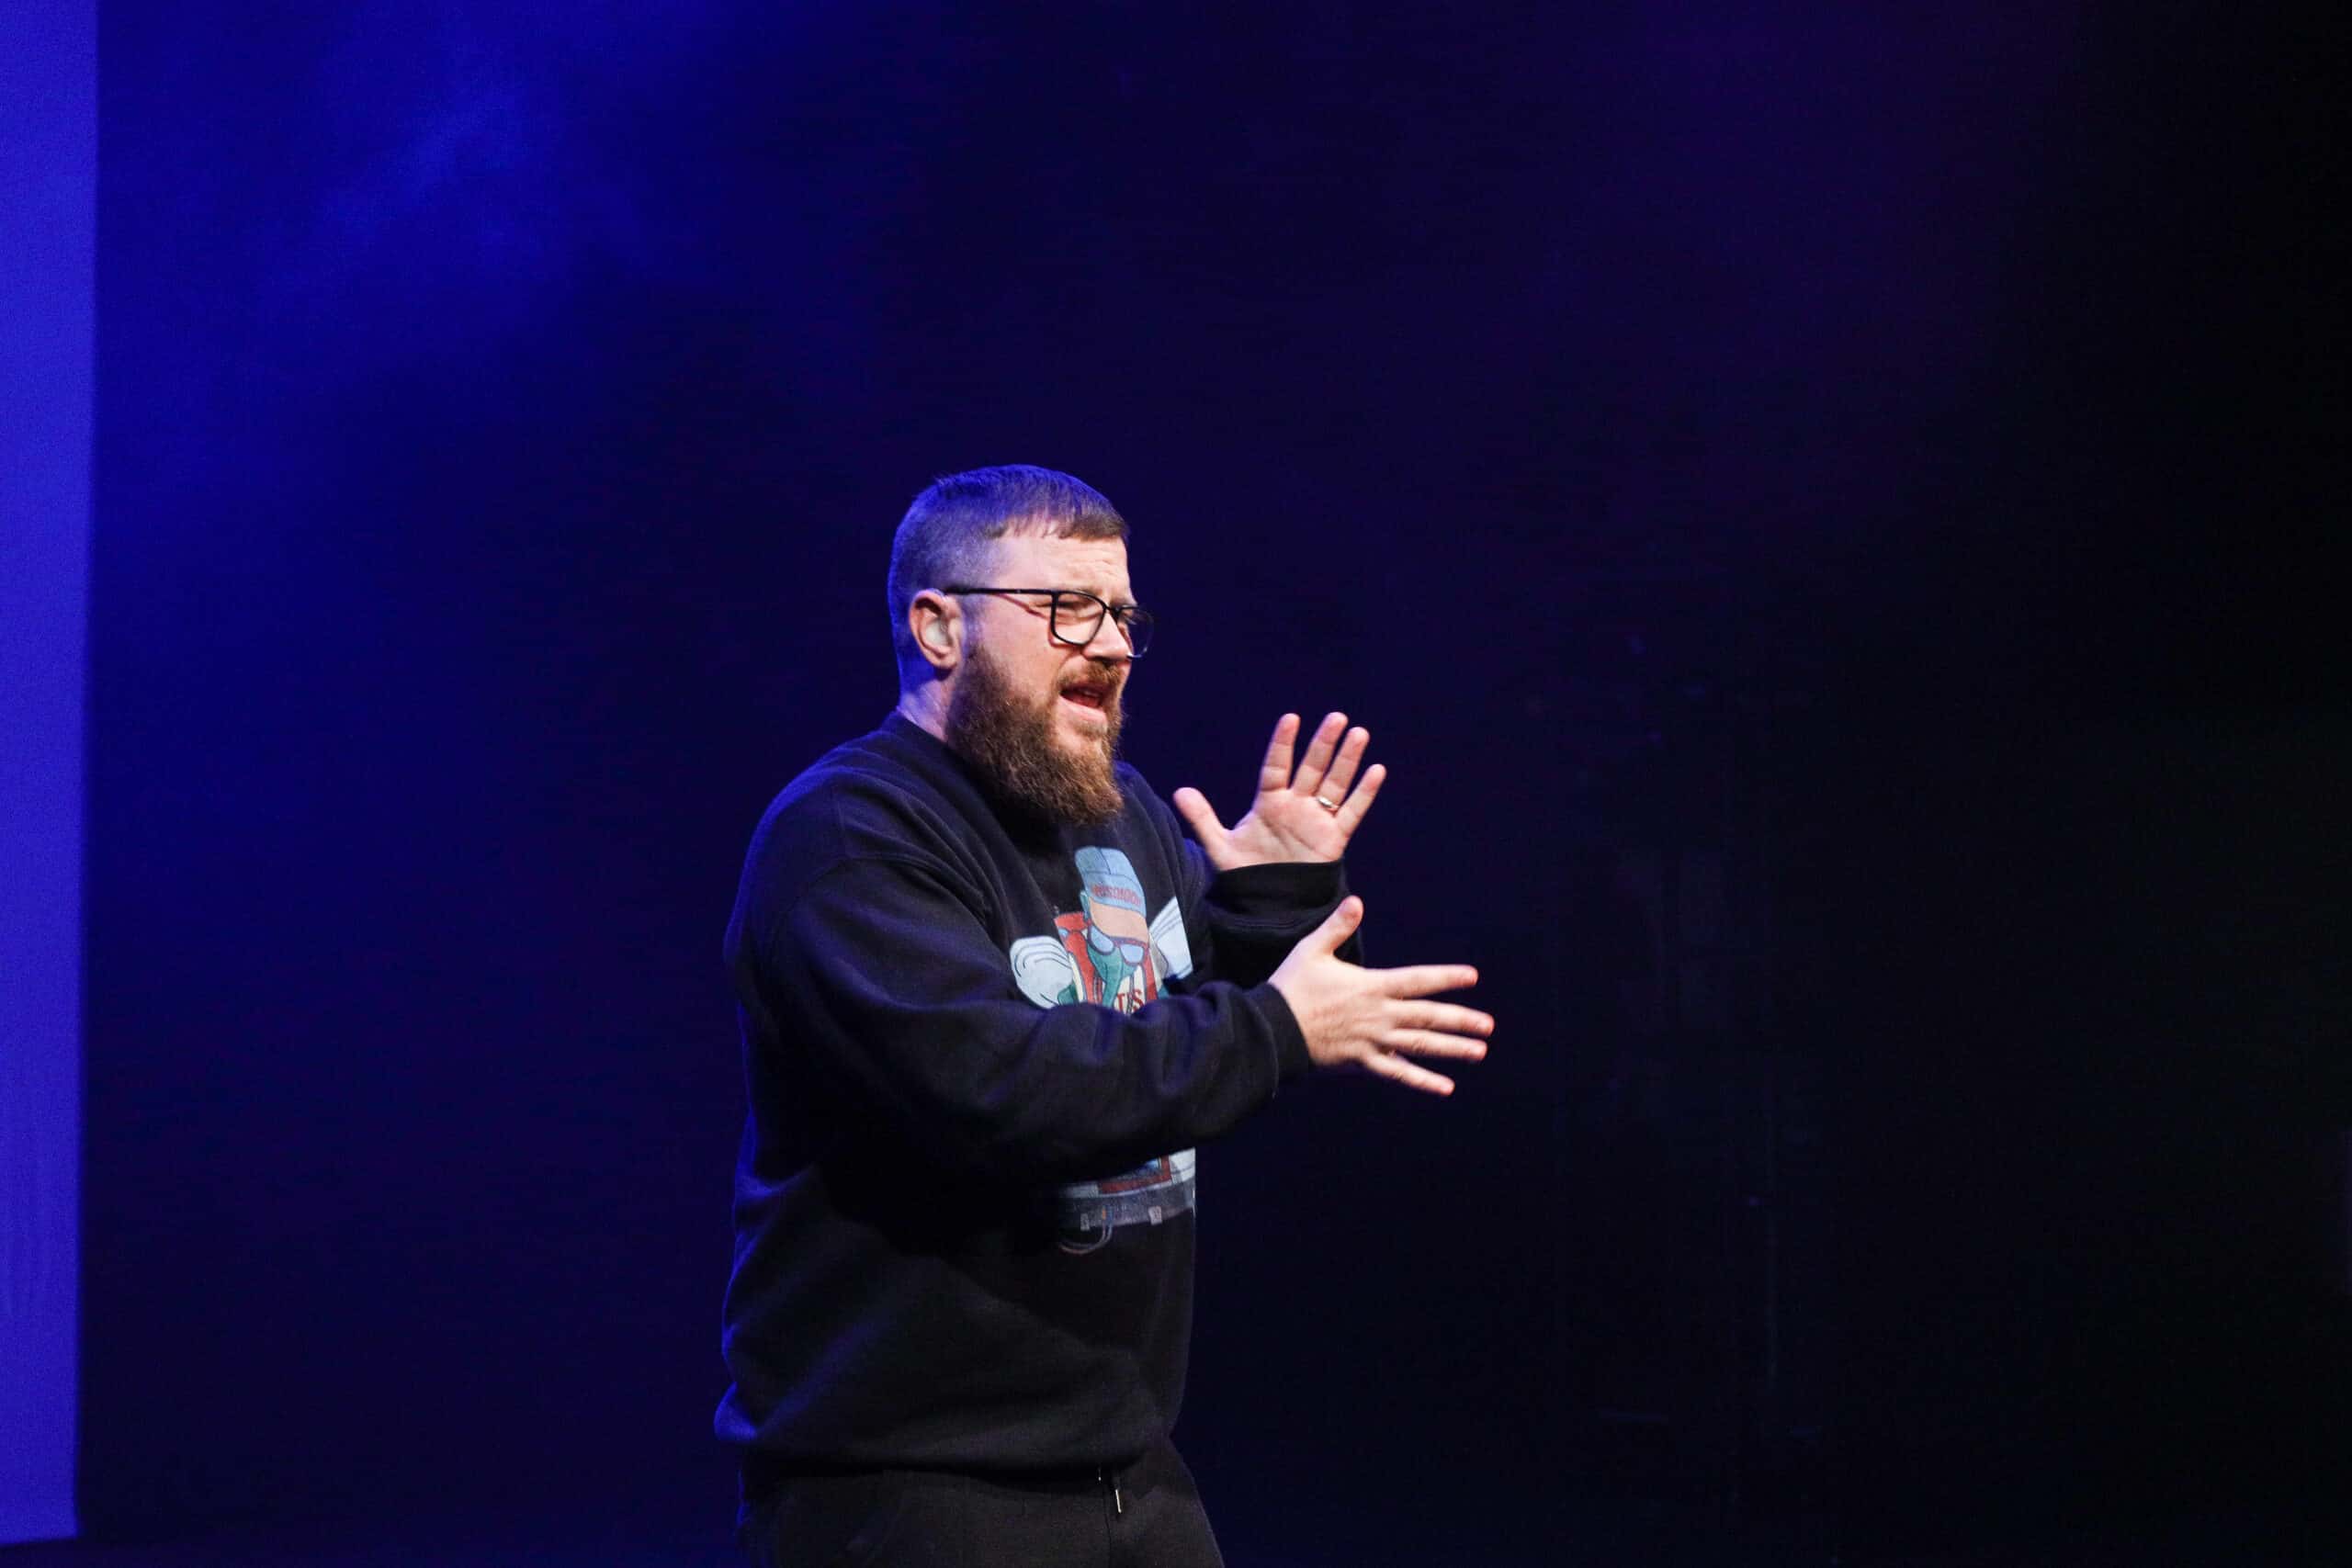 MC Geezer a white man with short brown hair and beard. He has black glasses, and is wearing a blue jumper with a large logo in the centre. He signs on stage at the Barbican.